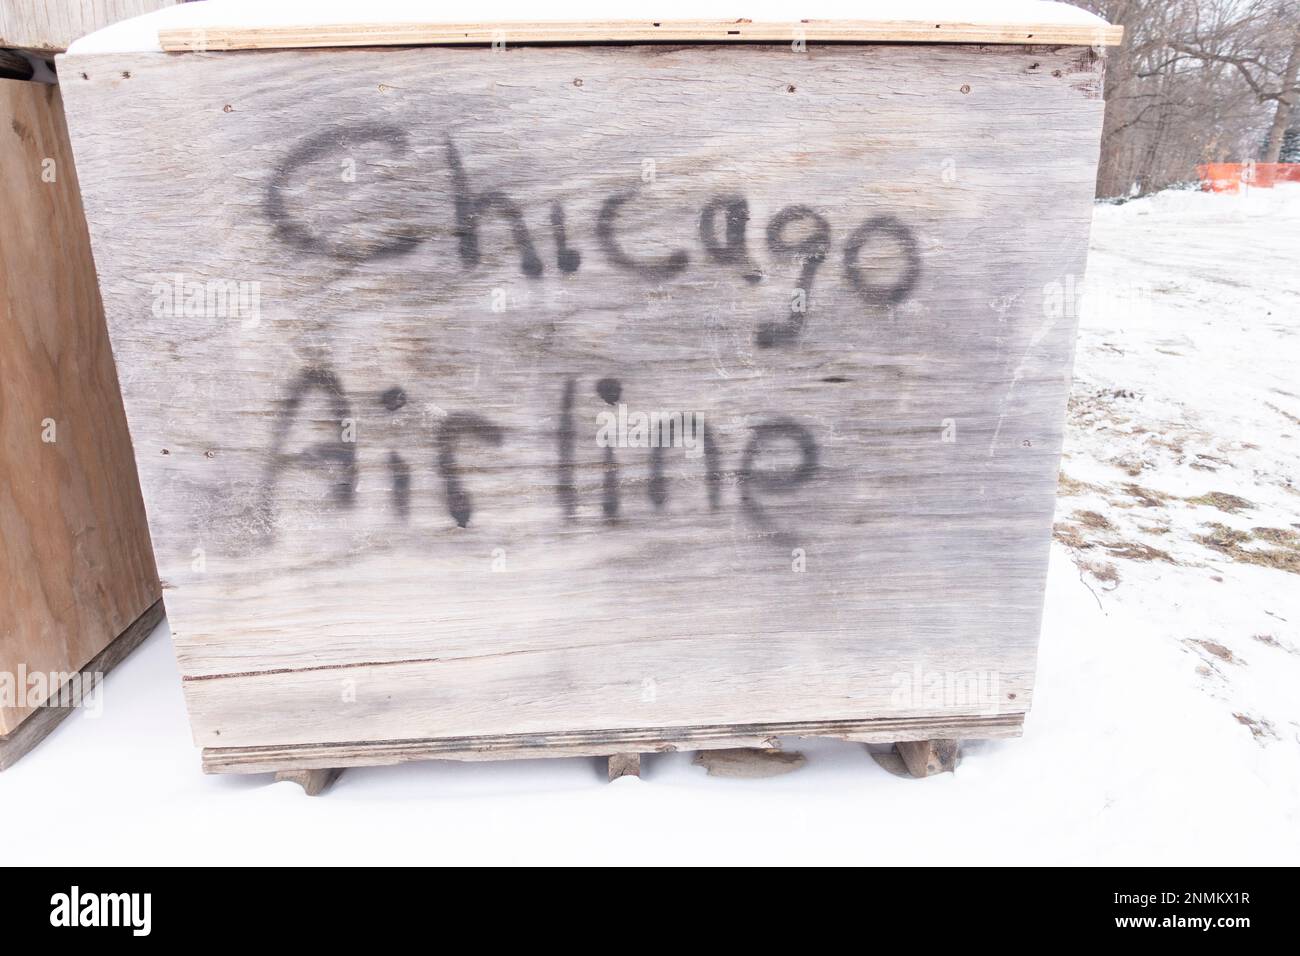 Large white wood tub labeled Chicago Airline found on a construction site. St Paul Minnesota MN USA Stock Photo